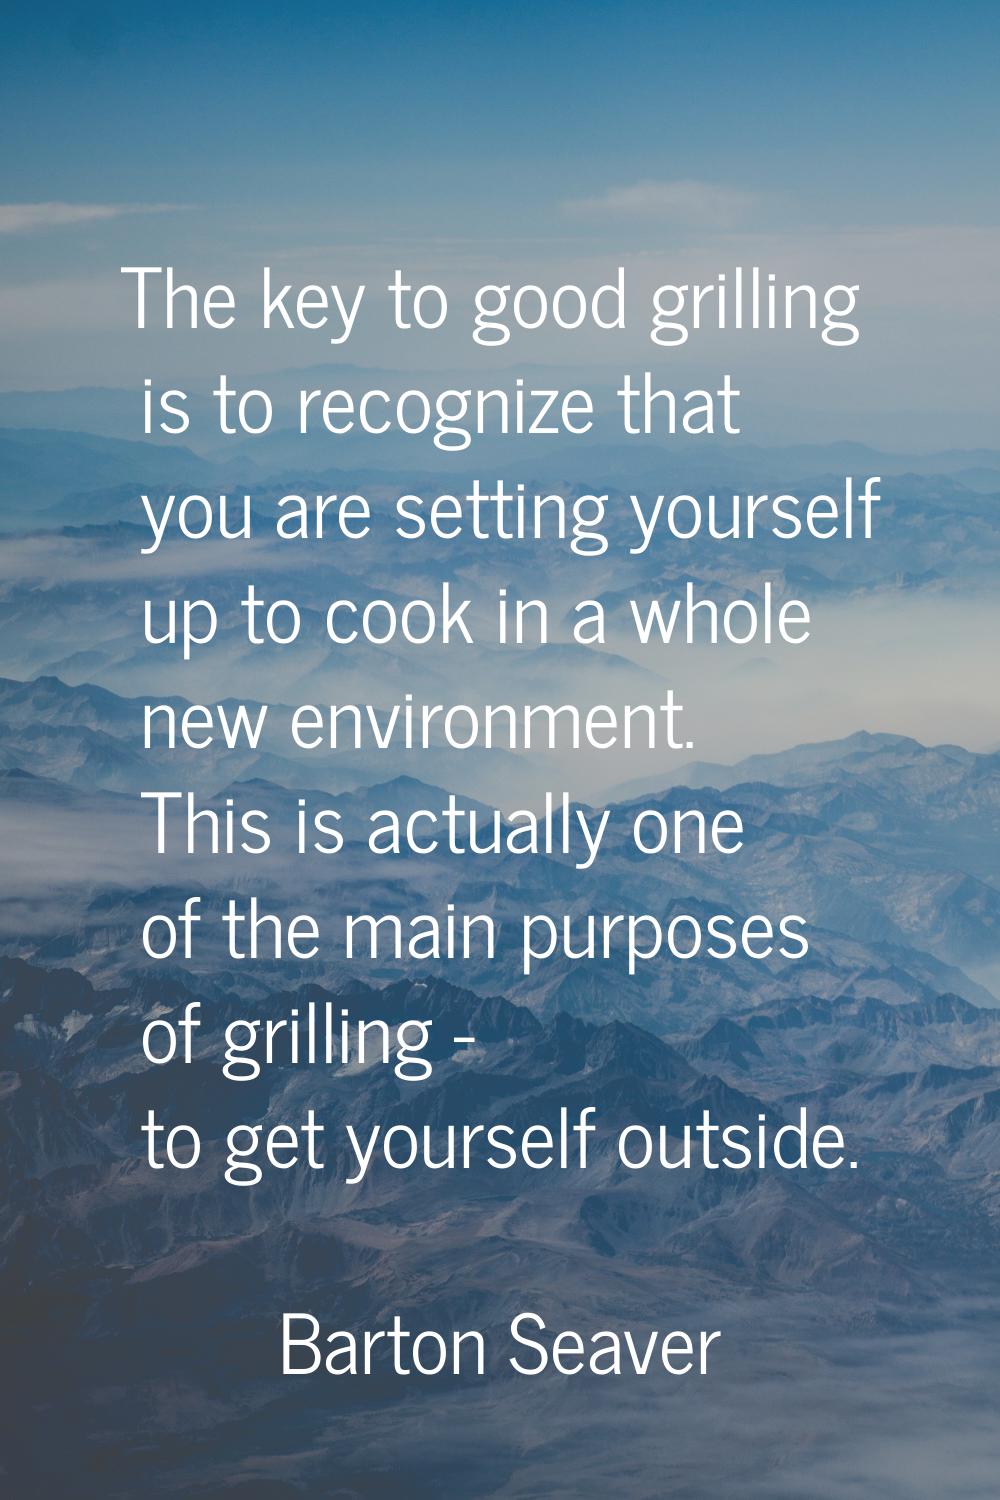 The key to good grilling is to recognize that you are setting yourself up to cook in a whole new en